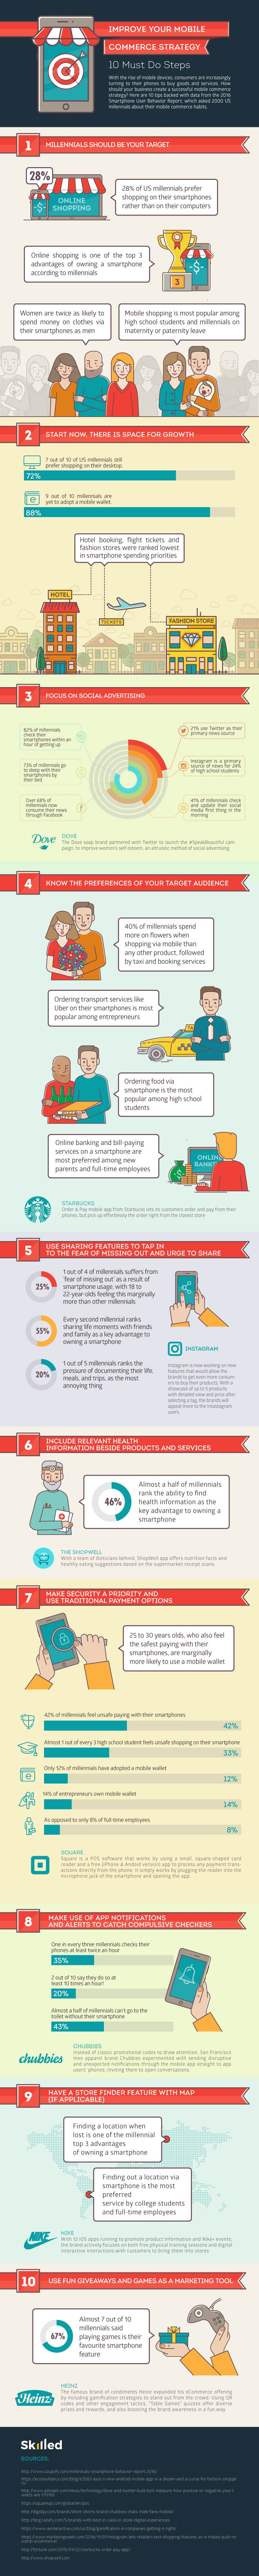 10 Must Do Steps to Improve Your Mobile Commerce Strategy [Infographic]